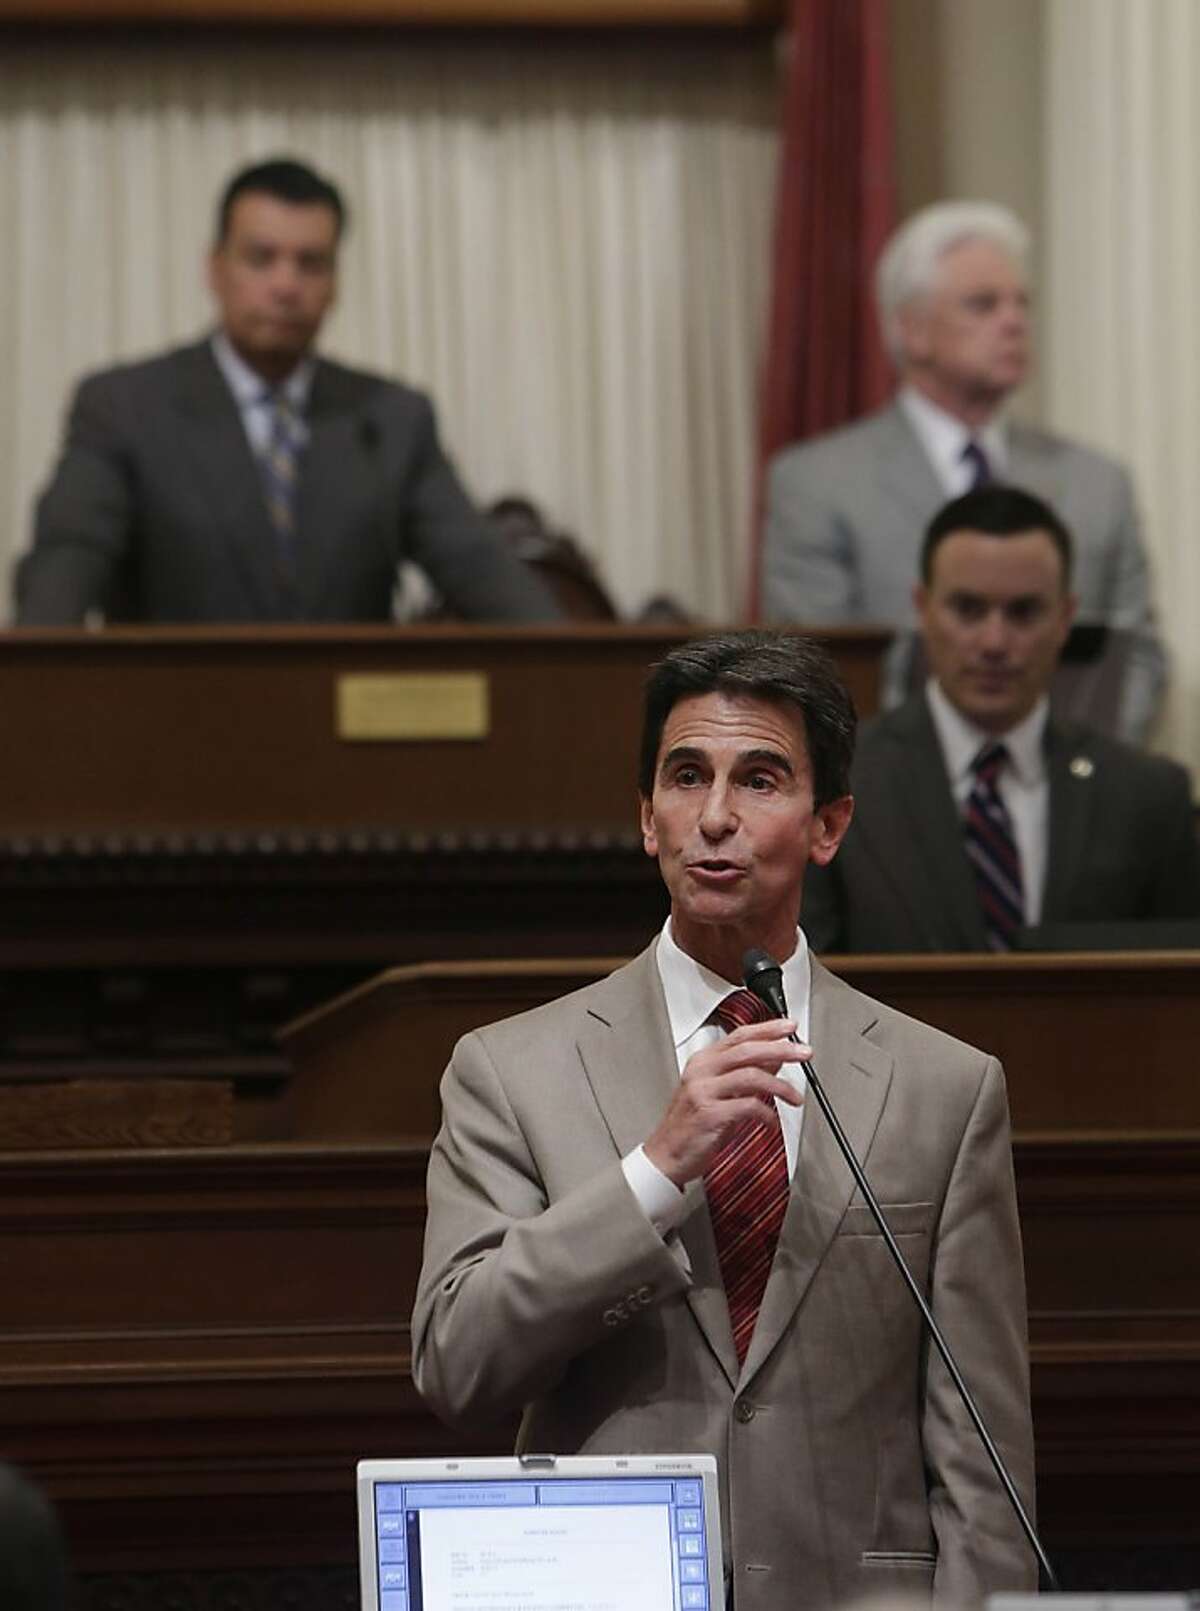 State Sen. Mark Leno, D-San Francisco, urges the passage of a bill regarding transgender students at the state Capitol in Sacramento, Calif., Wednesday, July 3, 2013. By a 21-9 vote the Senate approved AB1266, by Assemblyman Tom Ammiano, D-San Francisco, that would require that public K-12 schools let transgender students choose which restrooms they use and which school teams they join based on their gender identity. (AP Photo/Rich Pedroncelli)